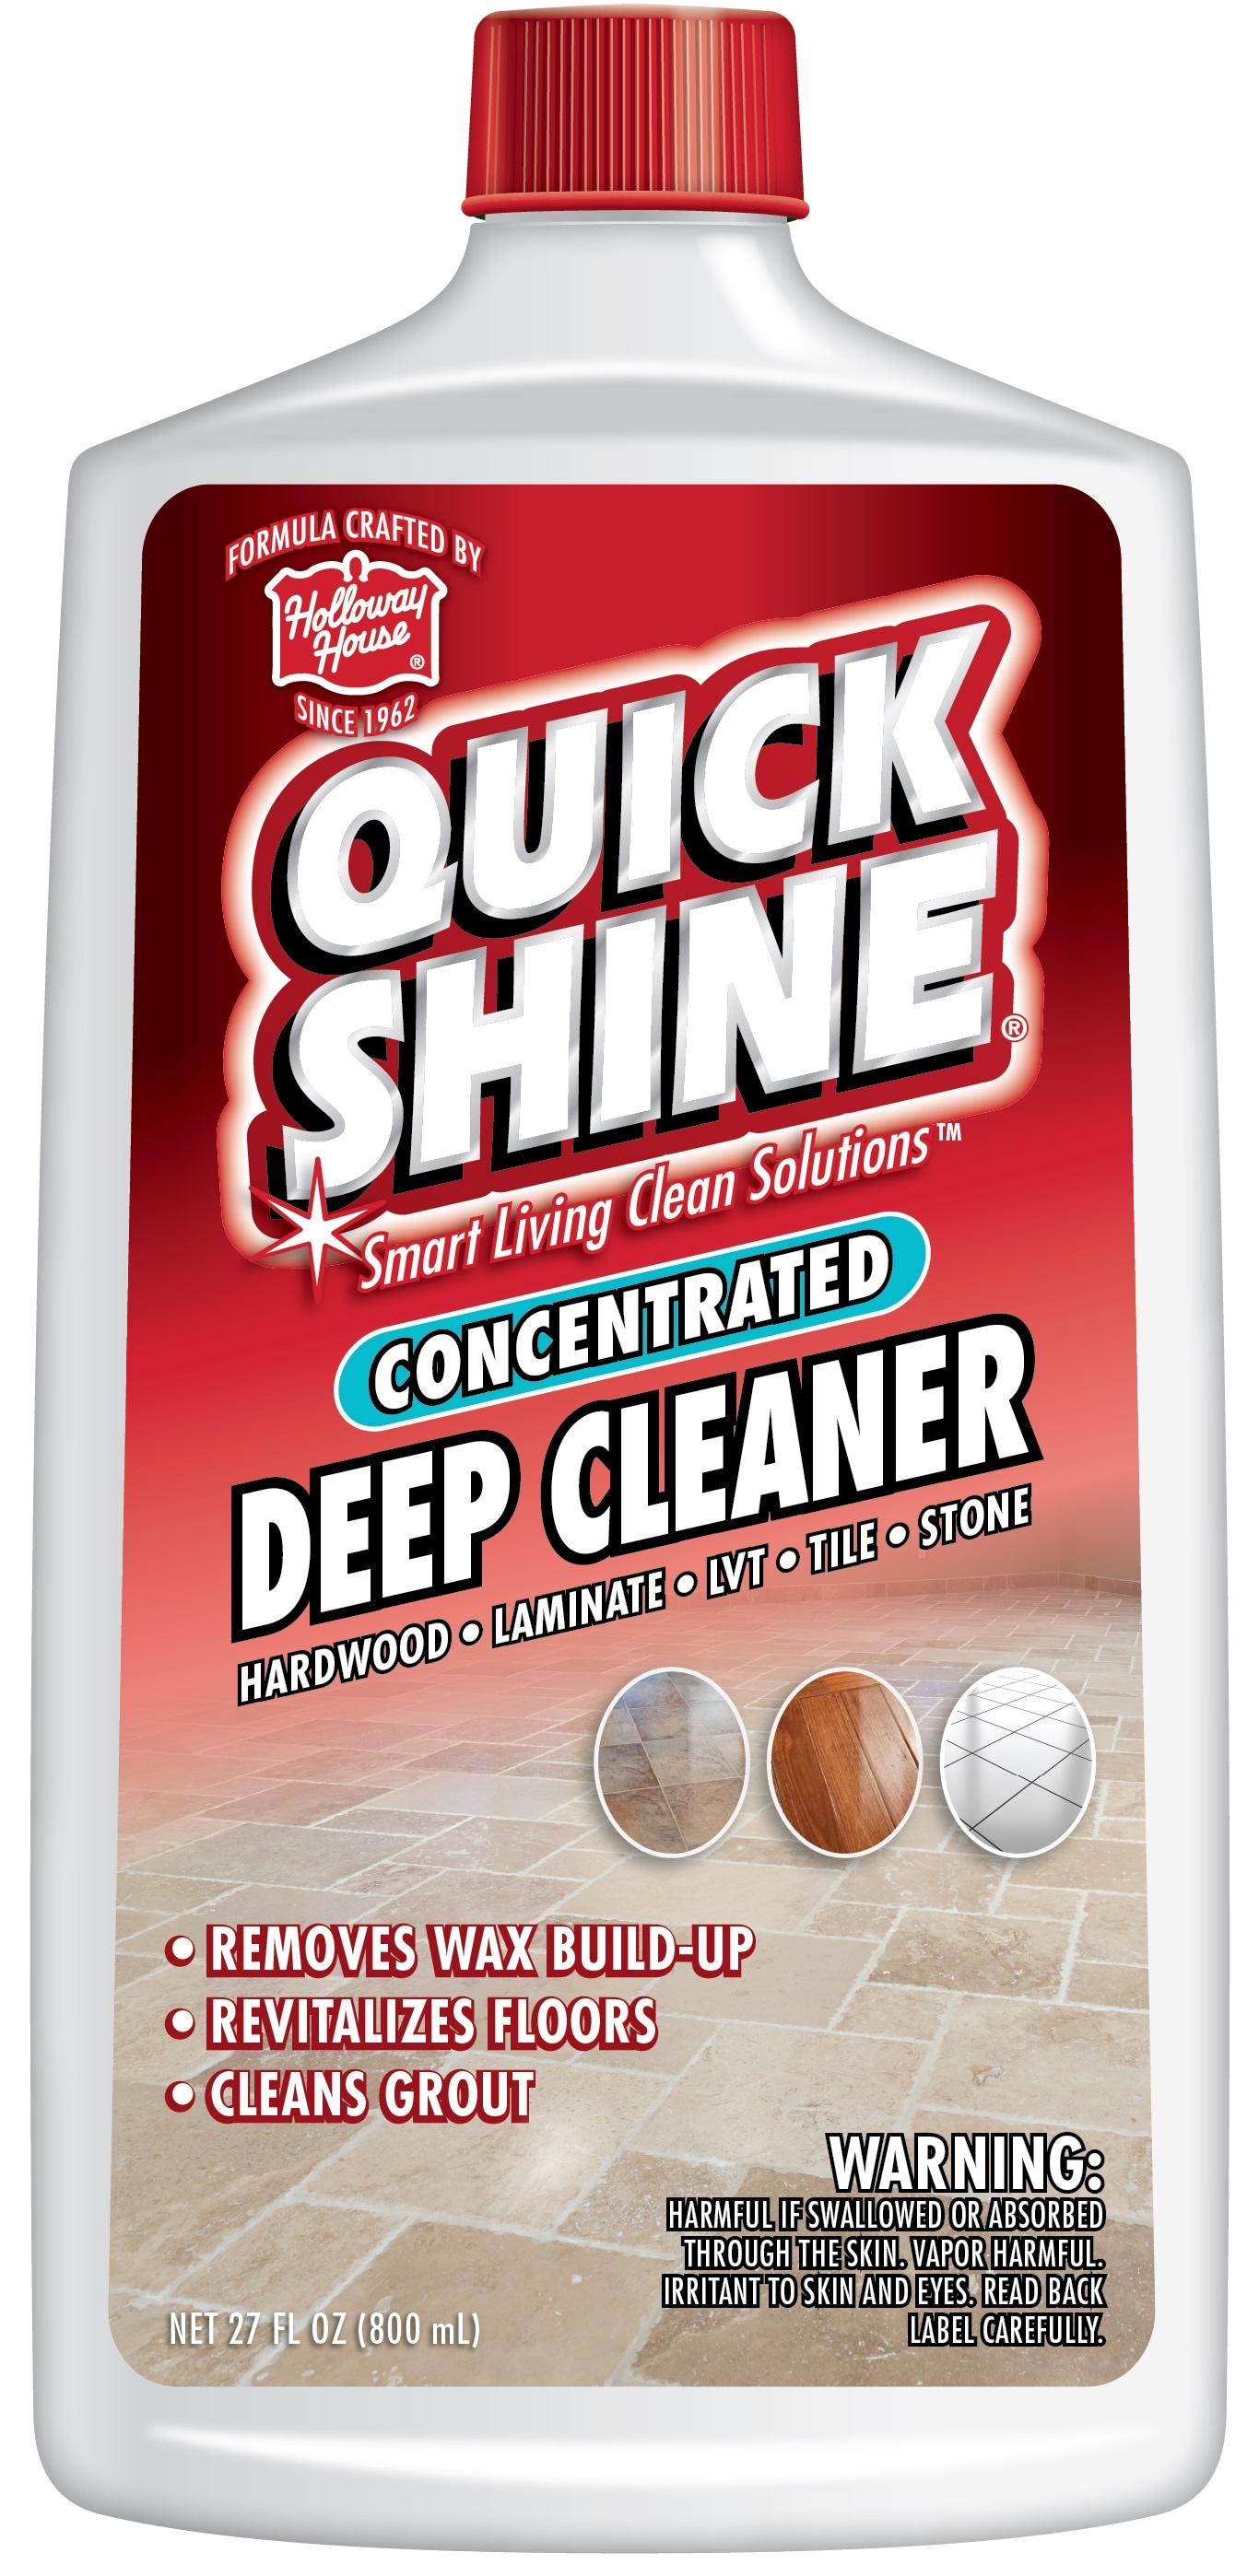 Quick Shine Disinfectant Floor Cleaner 27oz, 6Pk, Hospital Level  Disinfectant Kills 99.9% Germs & Bacteria, Cleans w/Power of Hydrogen  Peroxide & No Harsh Chemicals